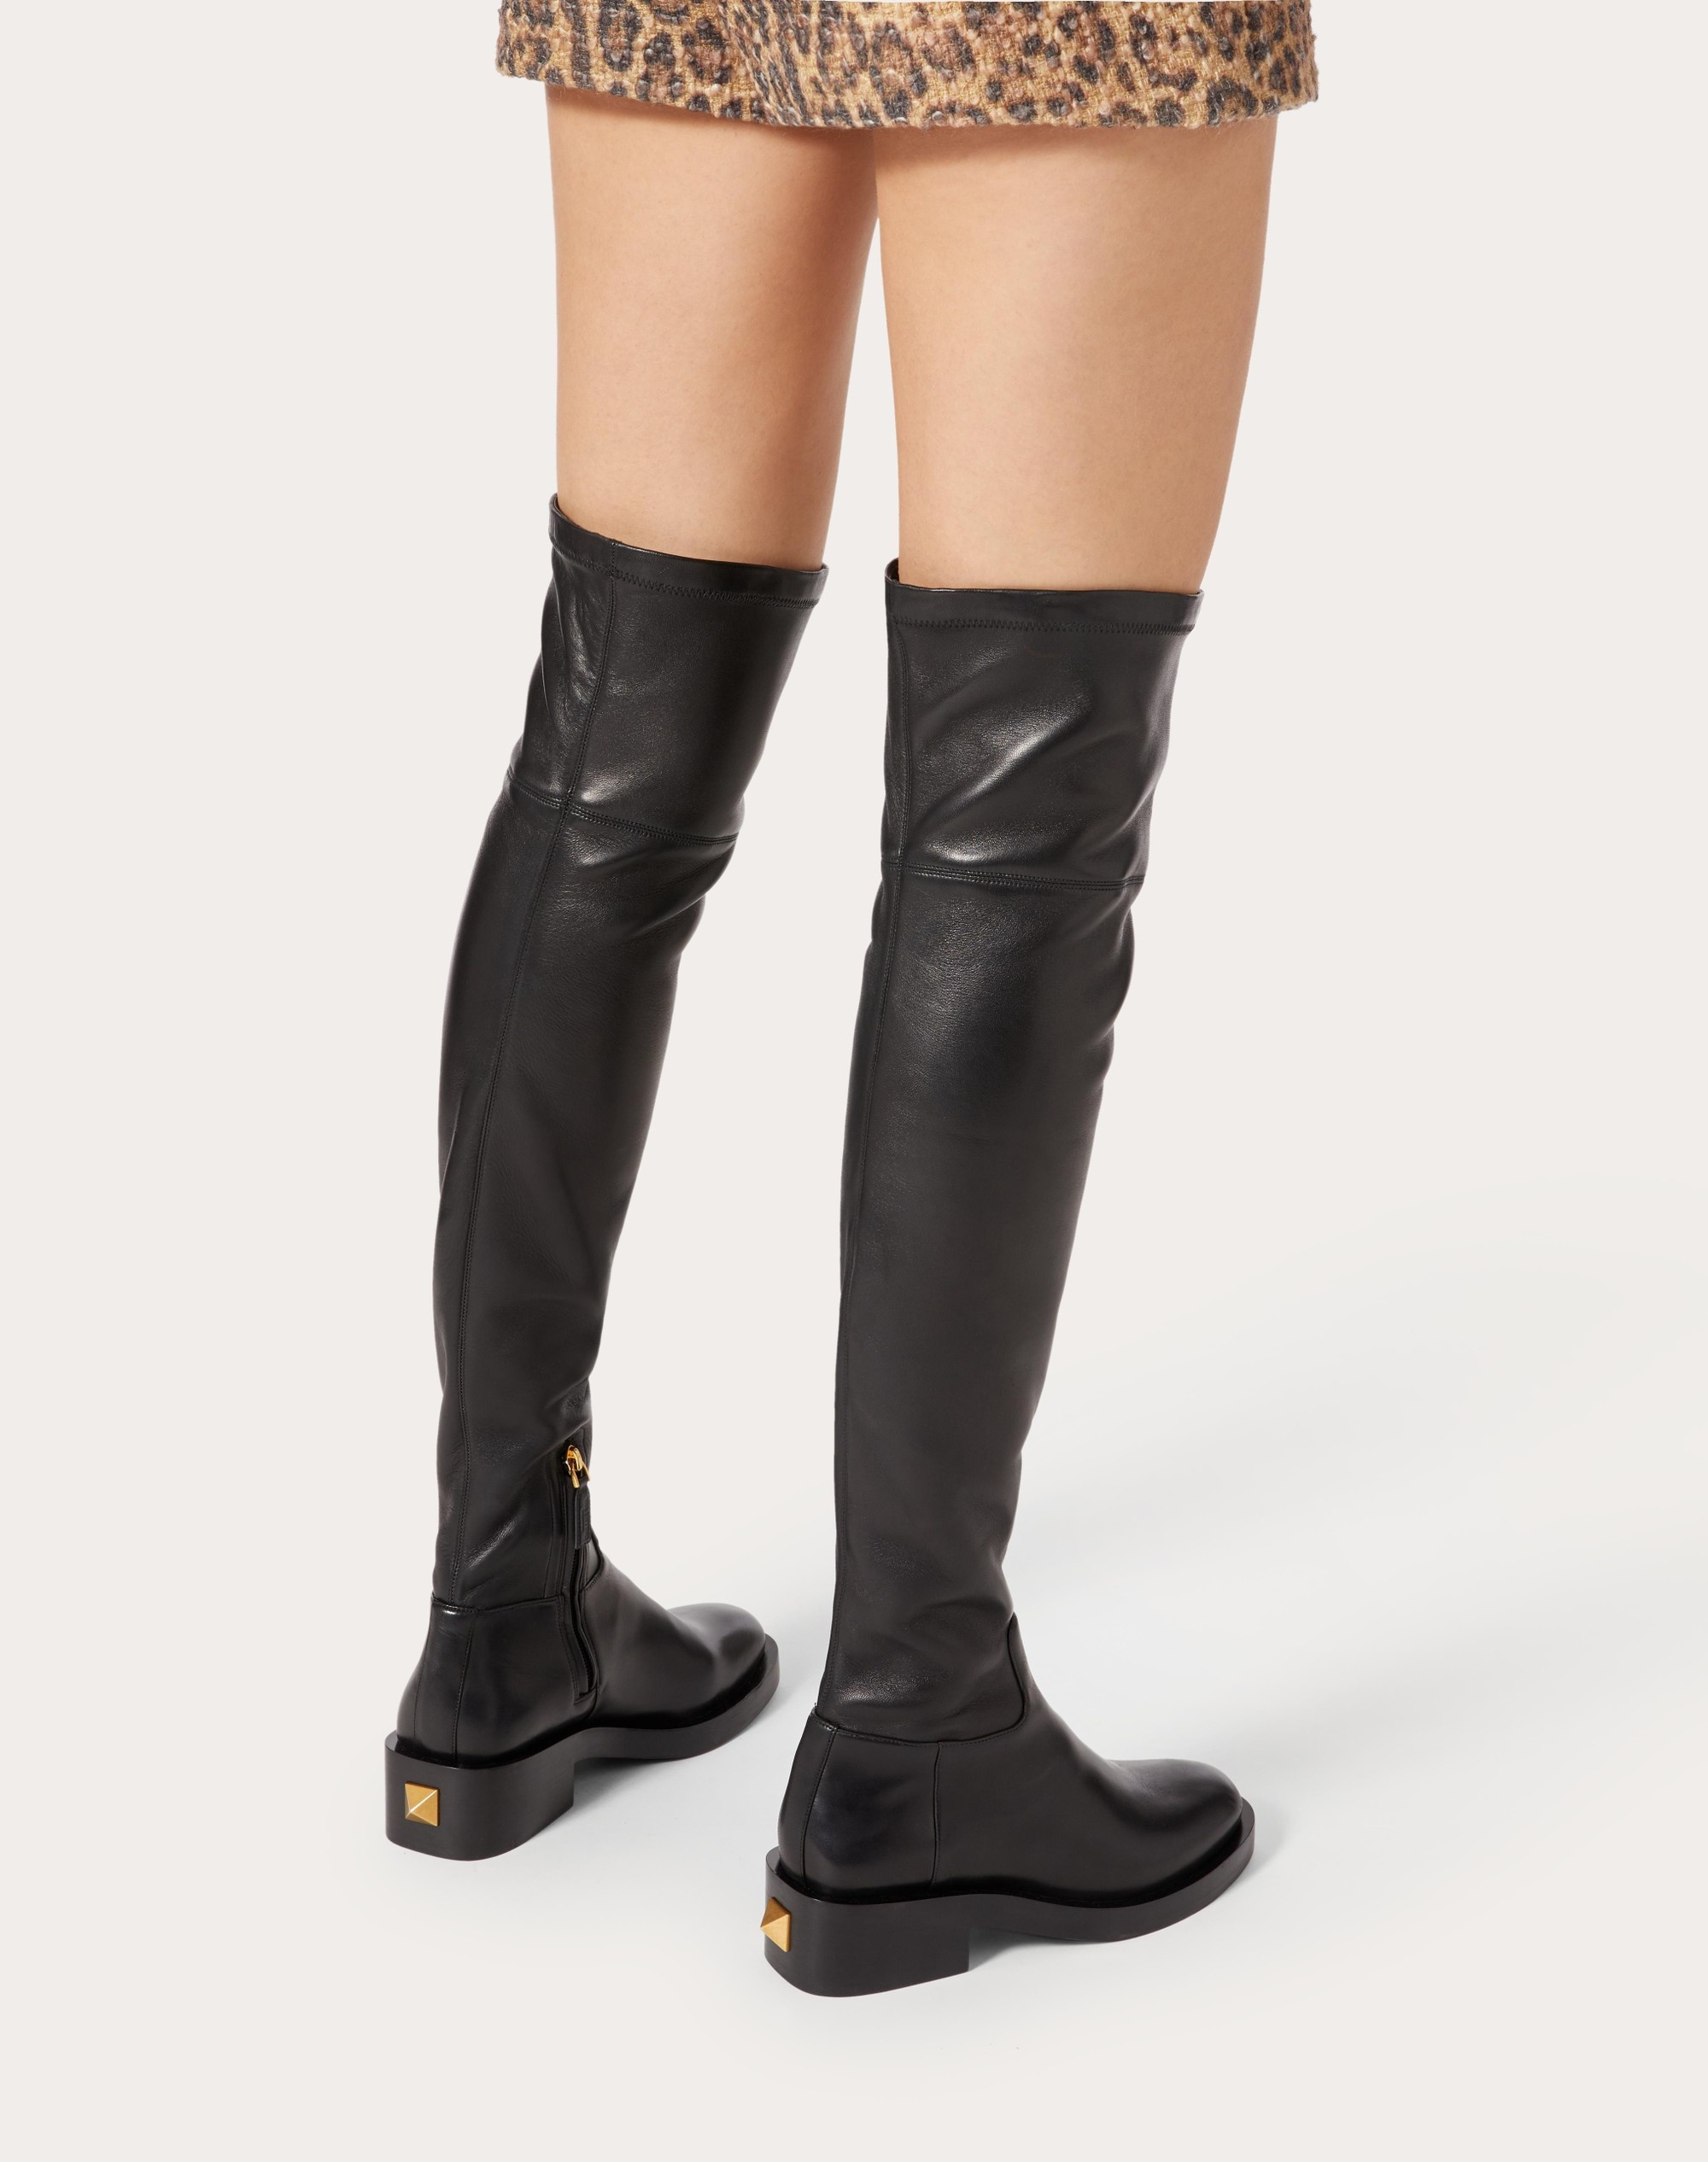 ROMAN STUD STRETCH NAPPA OVER-THE-KNEE BOOT 30MM - 6